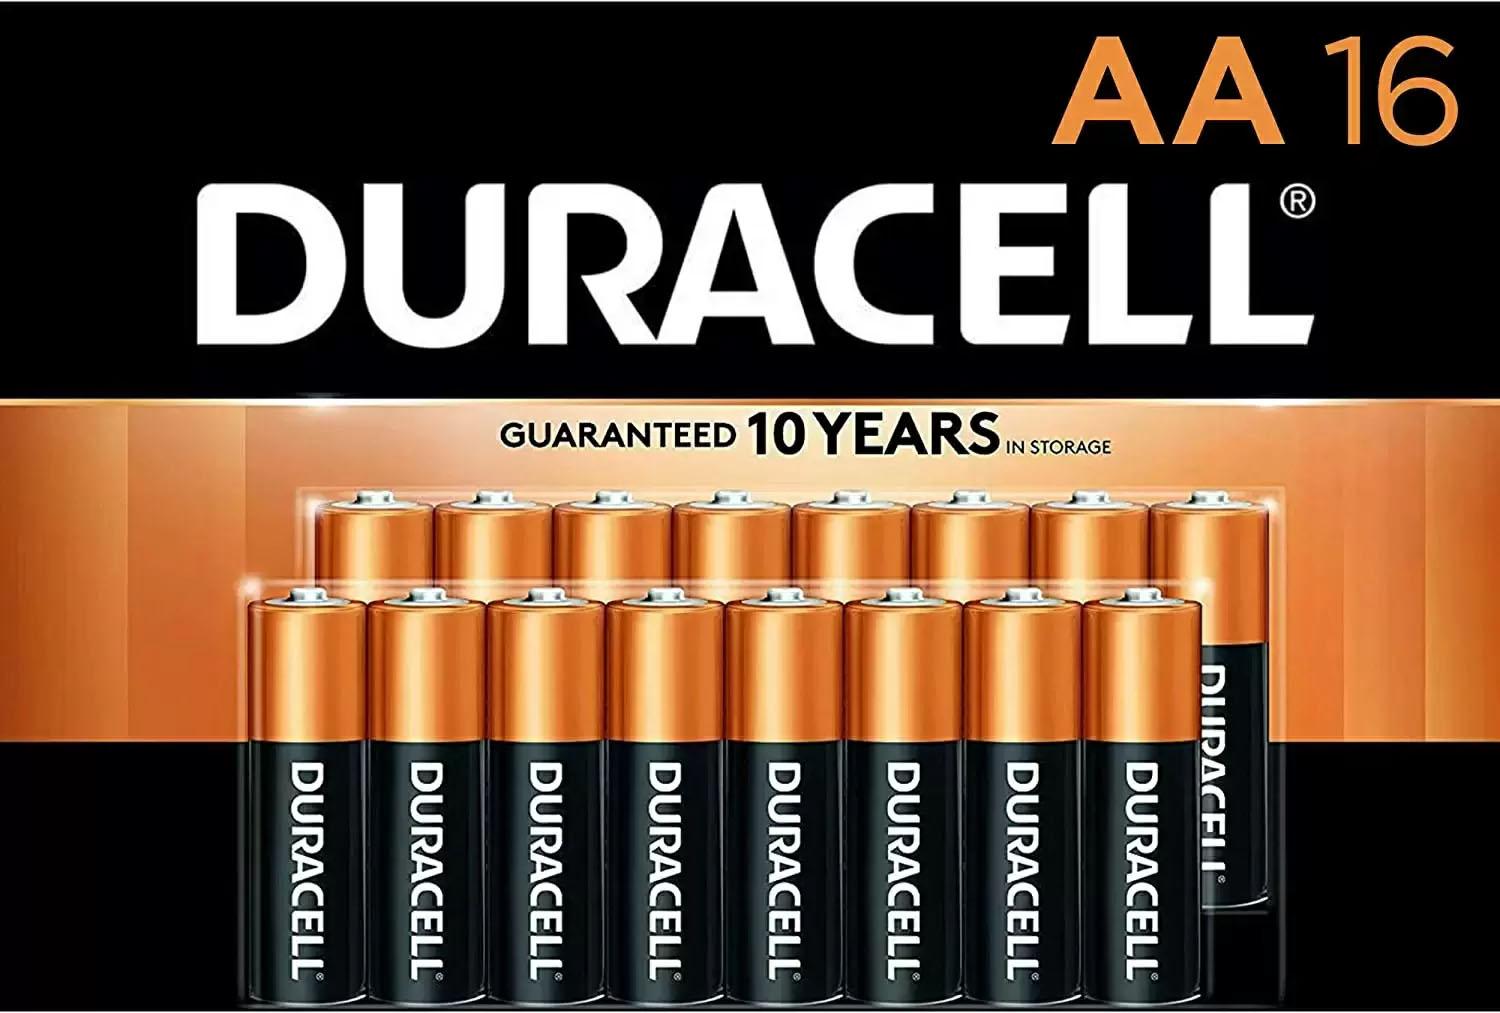 16 Duracell AA or AAA Batteries with 100% Rewards for $15.51